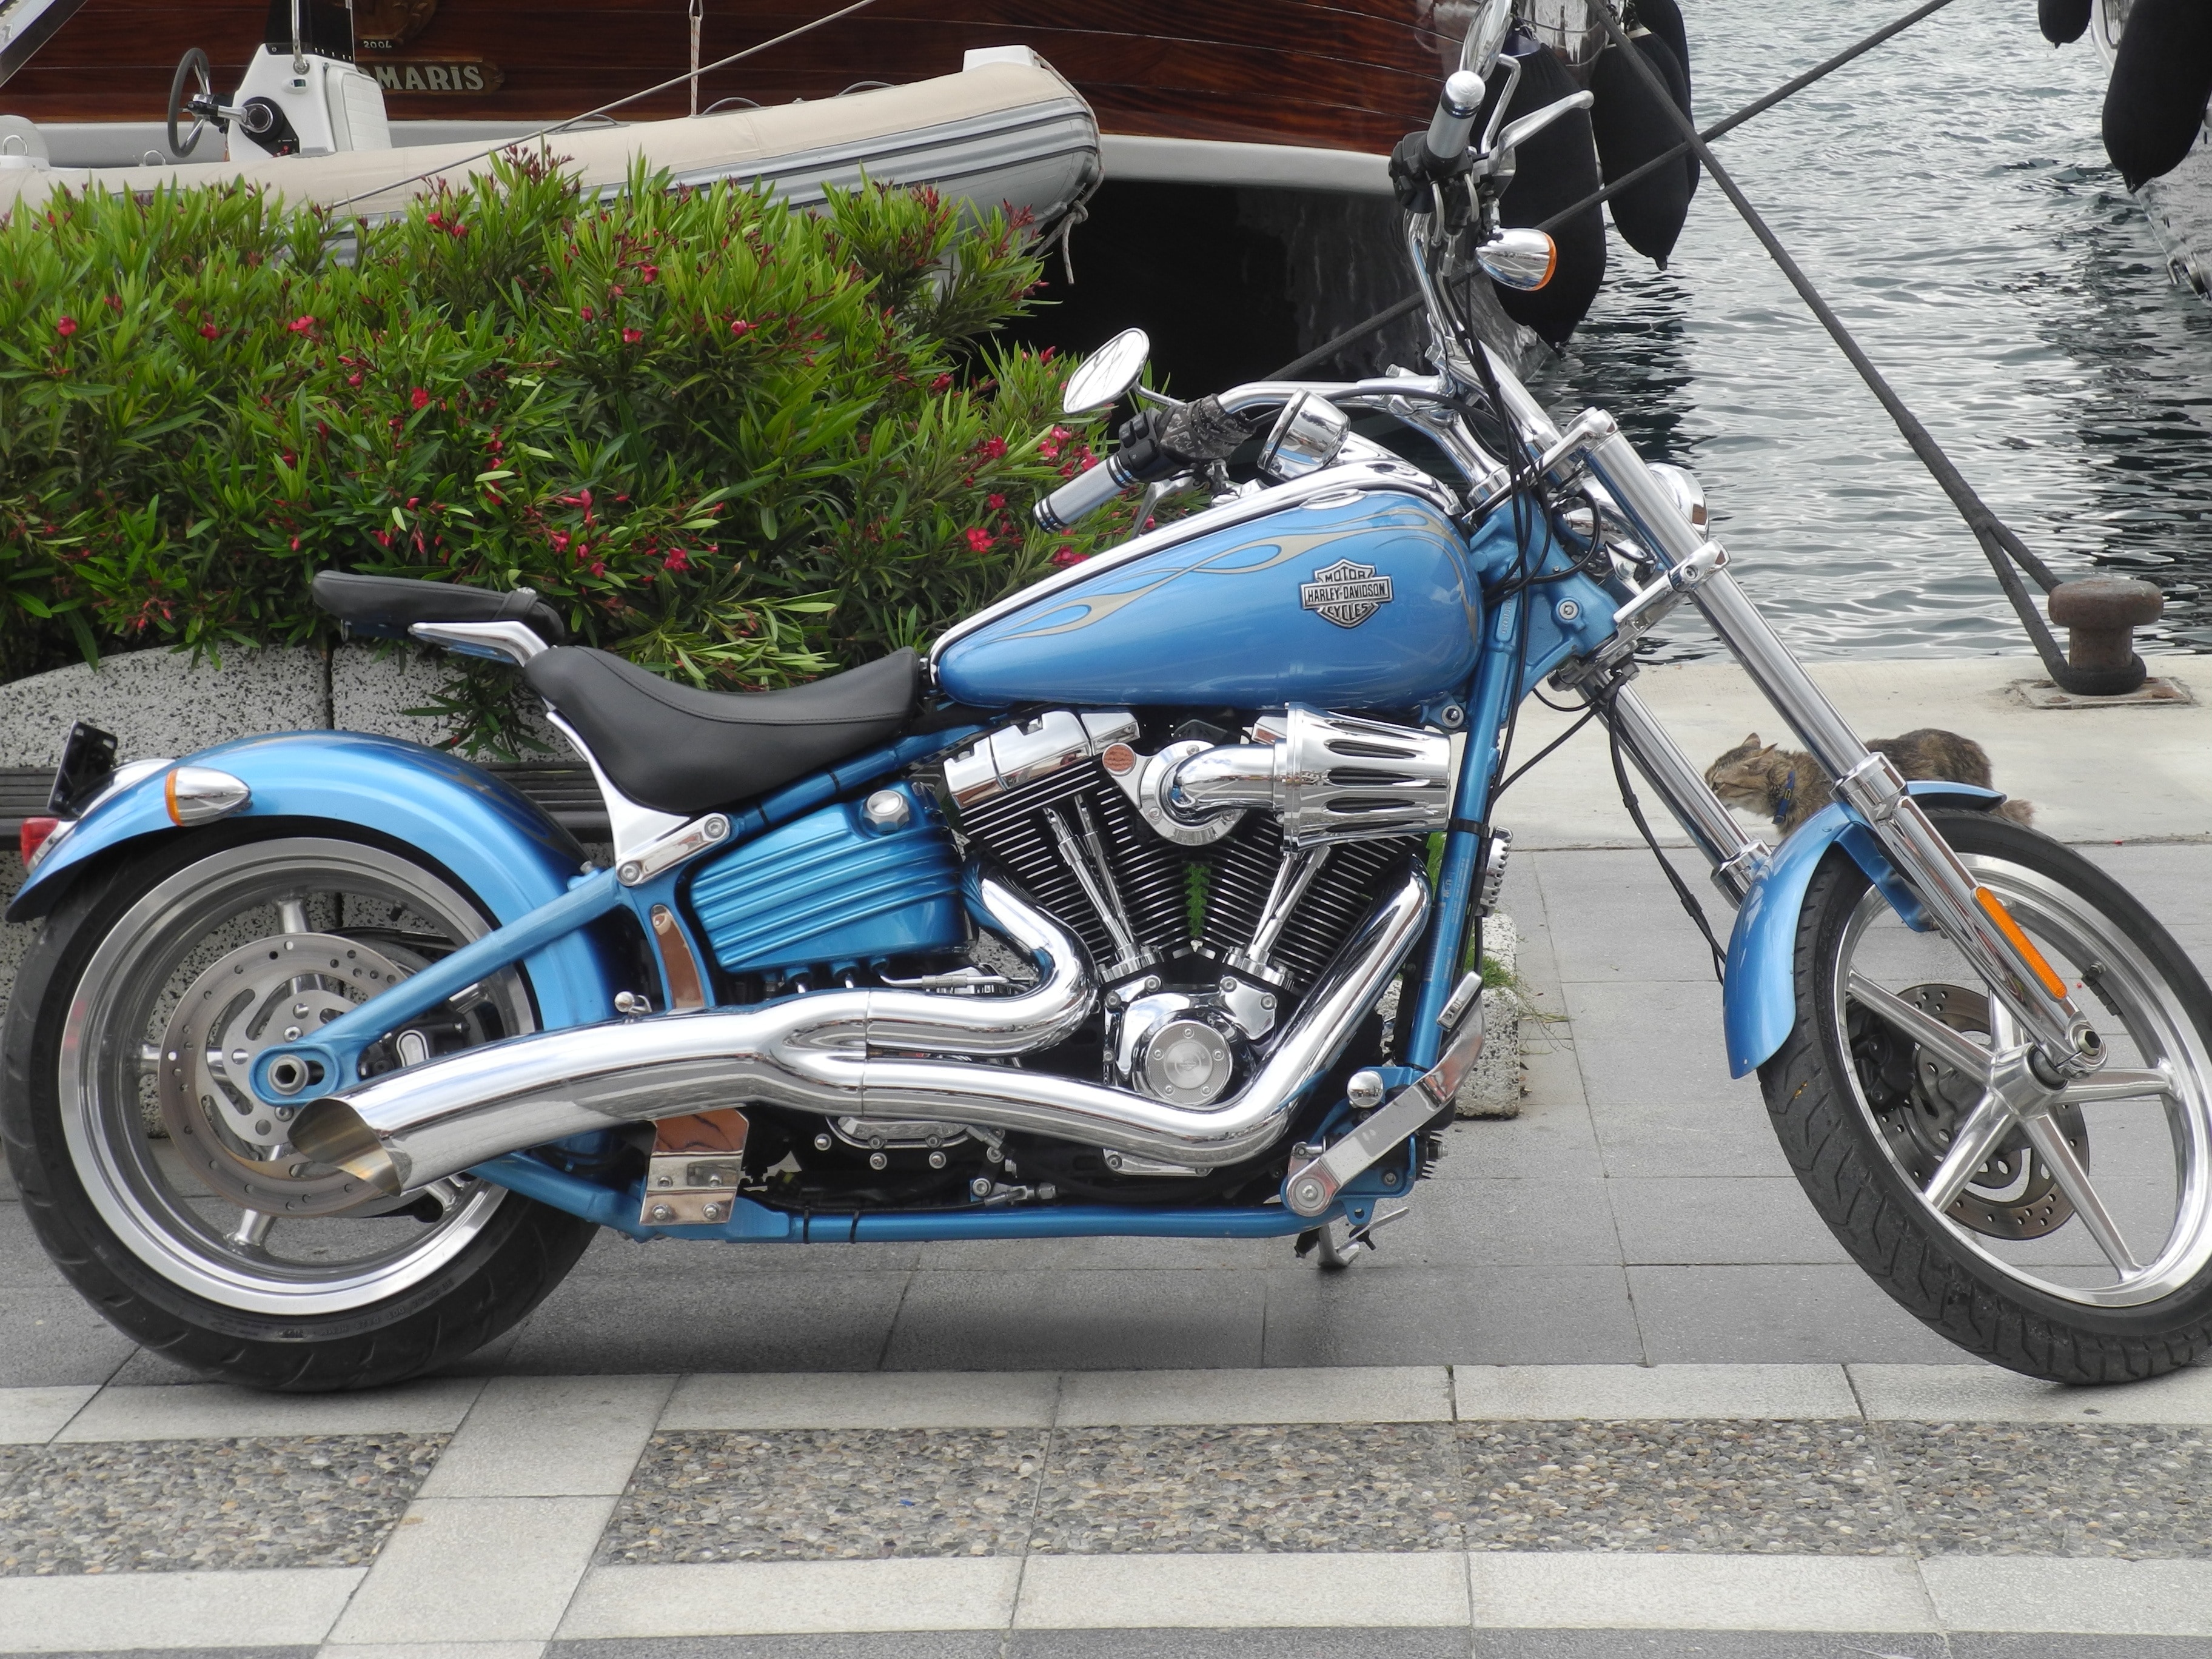 blue, black and gray chopper motorcycle parked near body of water